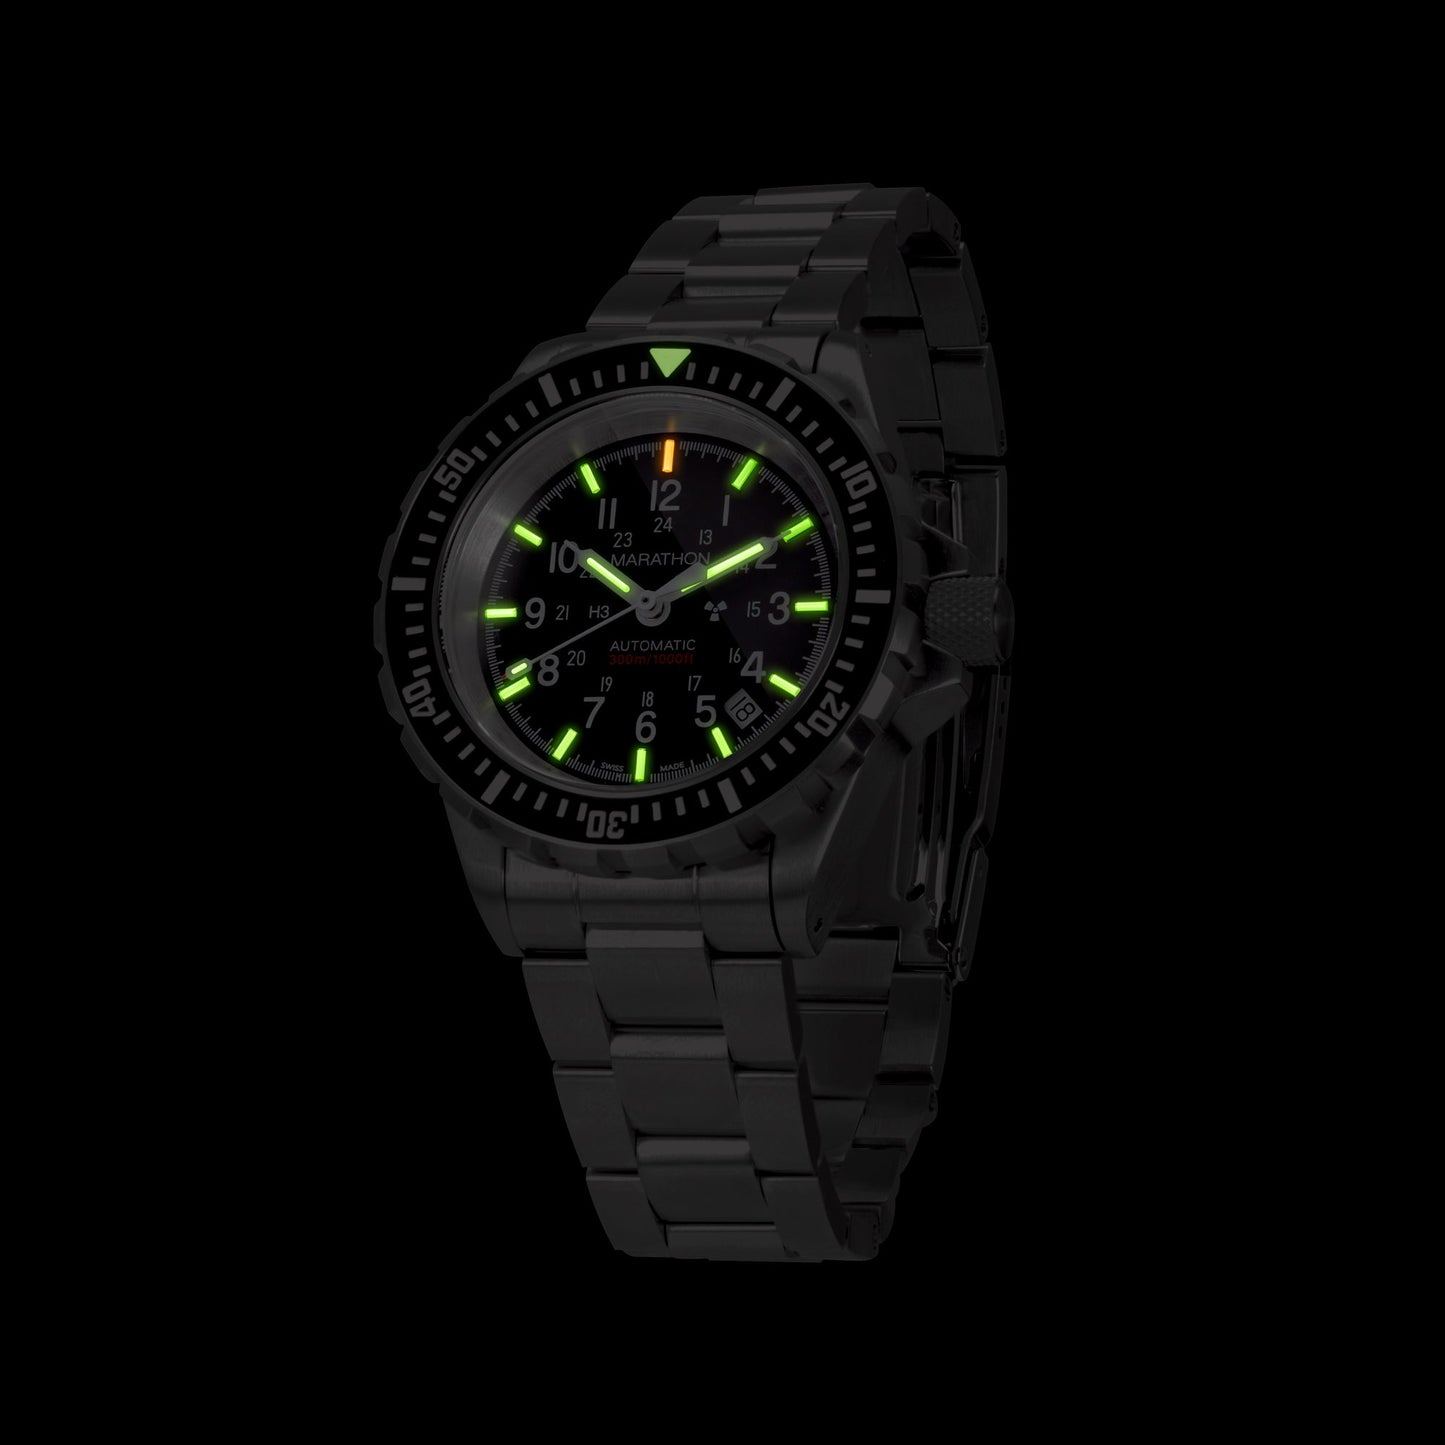 LARGE DIVER'S AUTOMATIC (GSAR) WITH STAINLESS STEEL BRACELET - 41MM